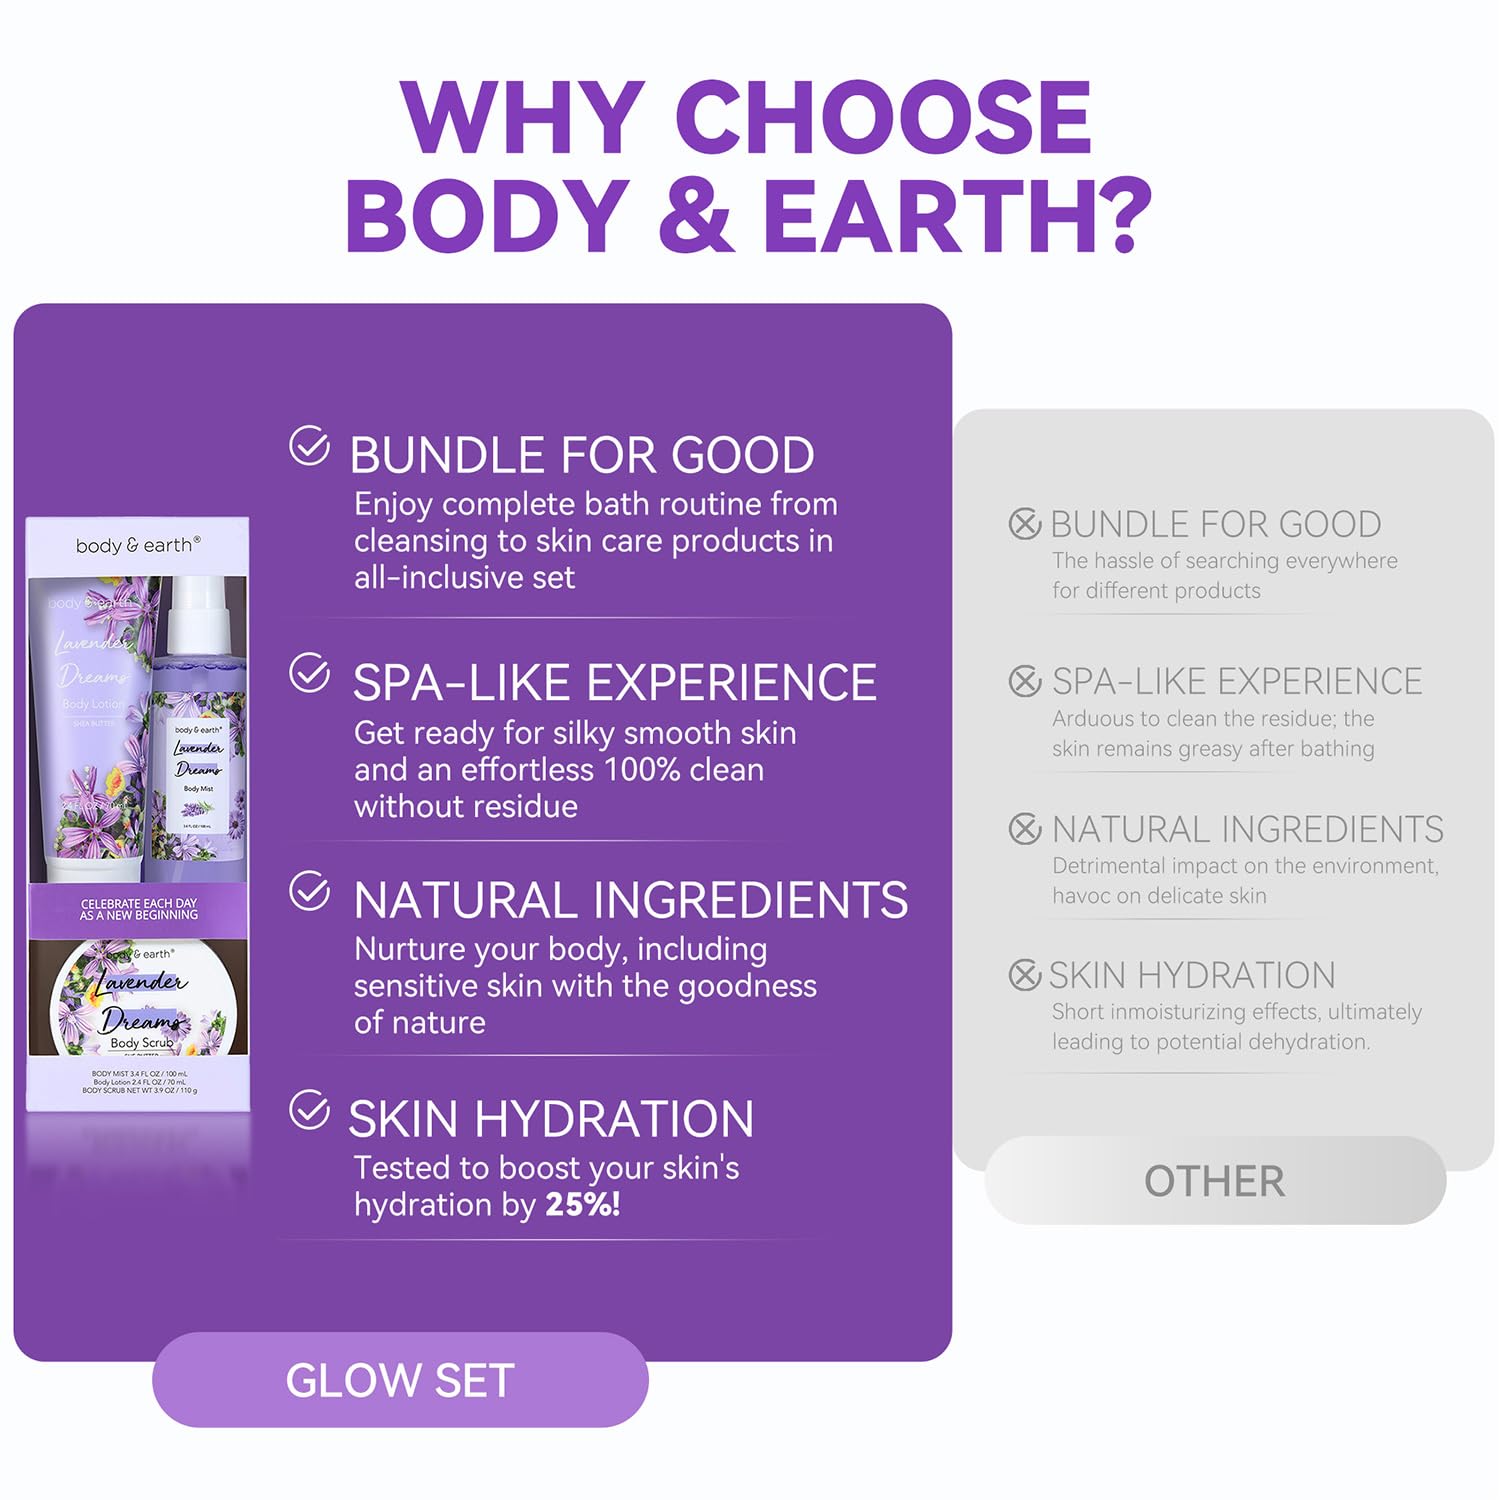 Body & Earth Body Mist Gift Set - Gift Sets for Women, Perfume, Body Lotion, and Body Scrub in a Lavender Dreams Box- Perfect Birthday Gifts for Moms, and Special Occasions,Unique Gift Ideas for Her